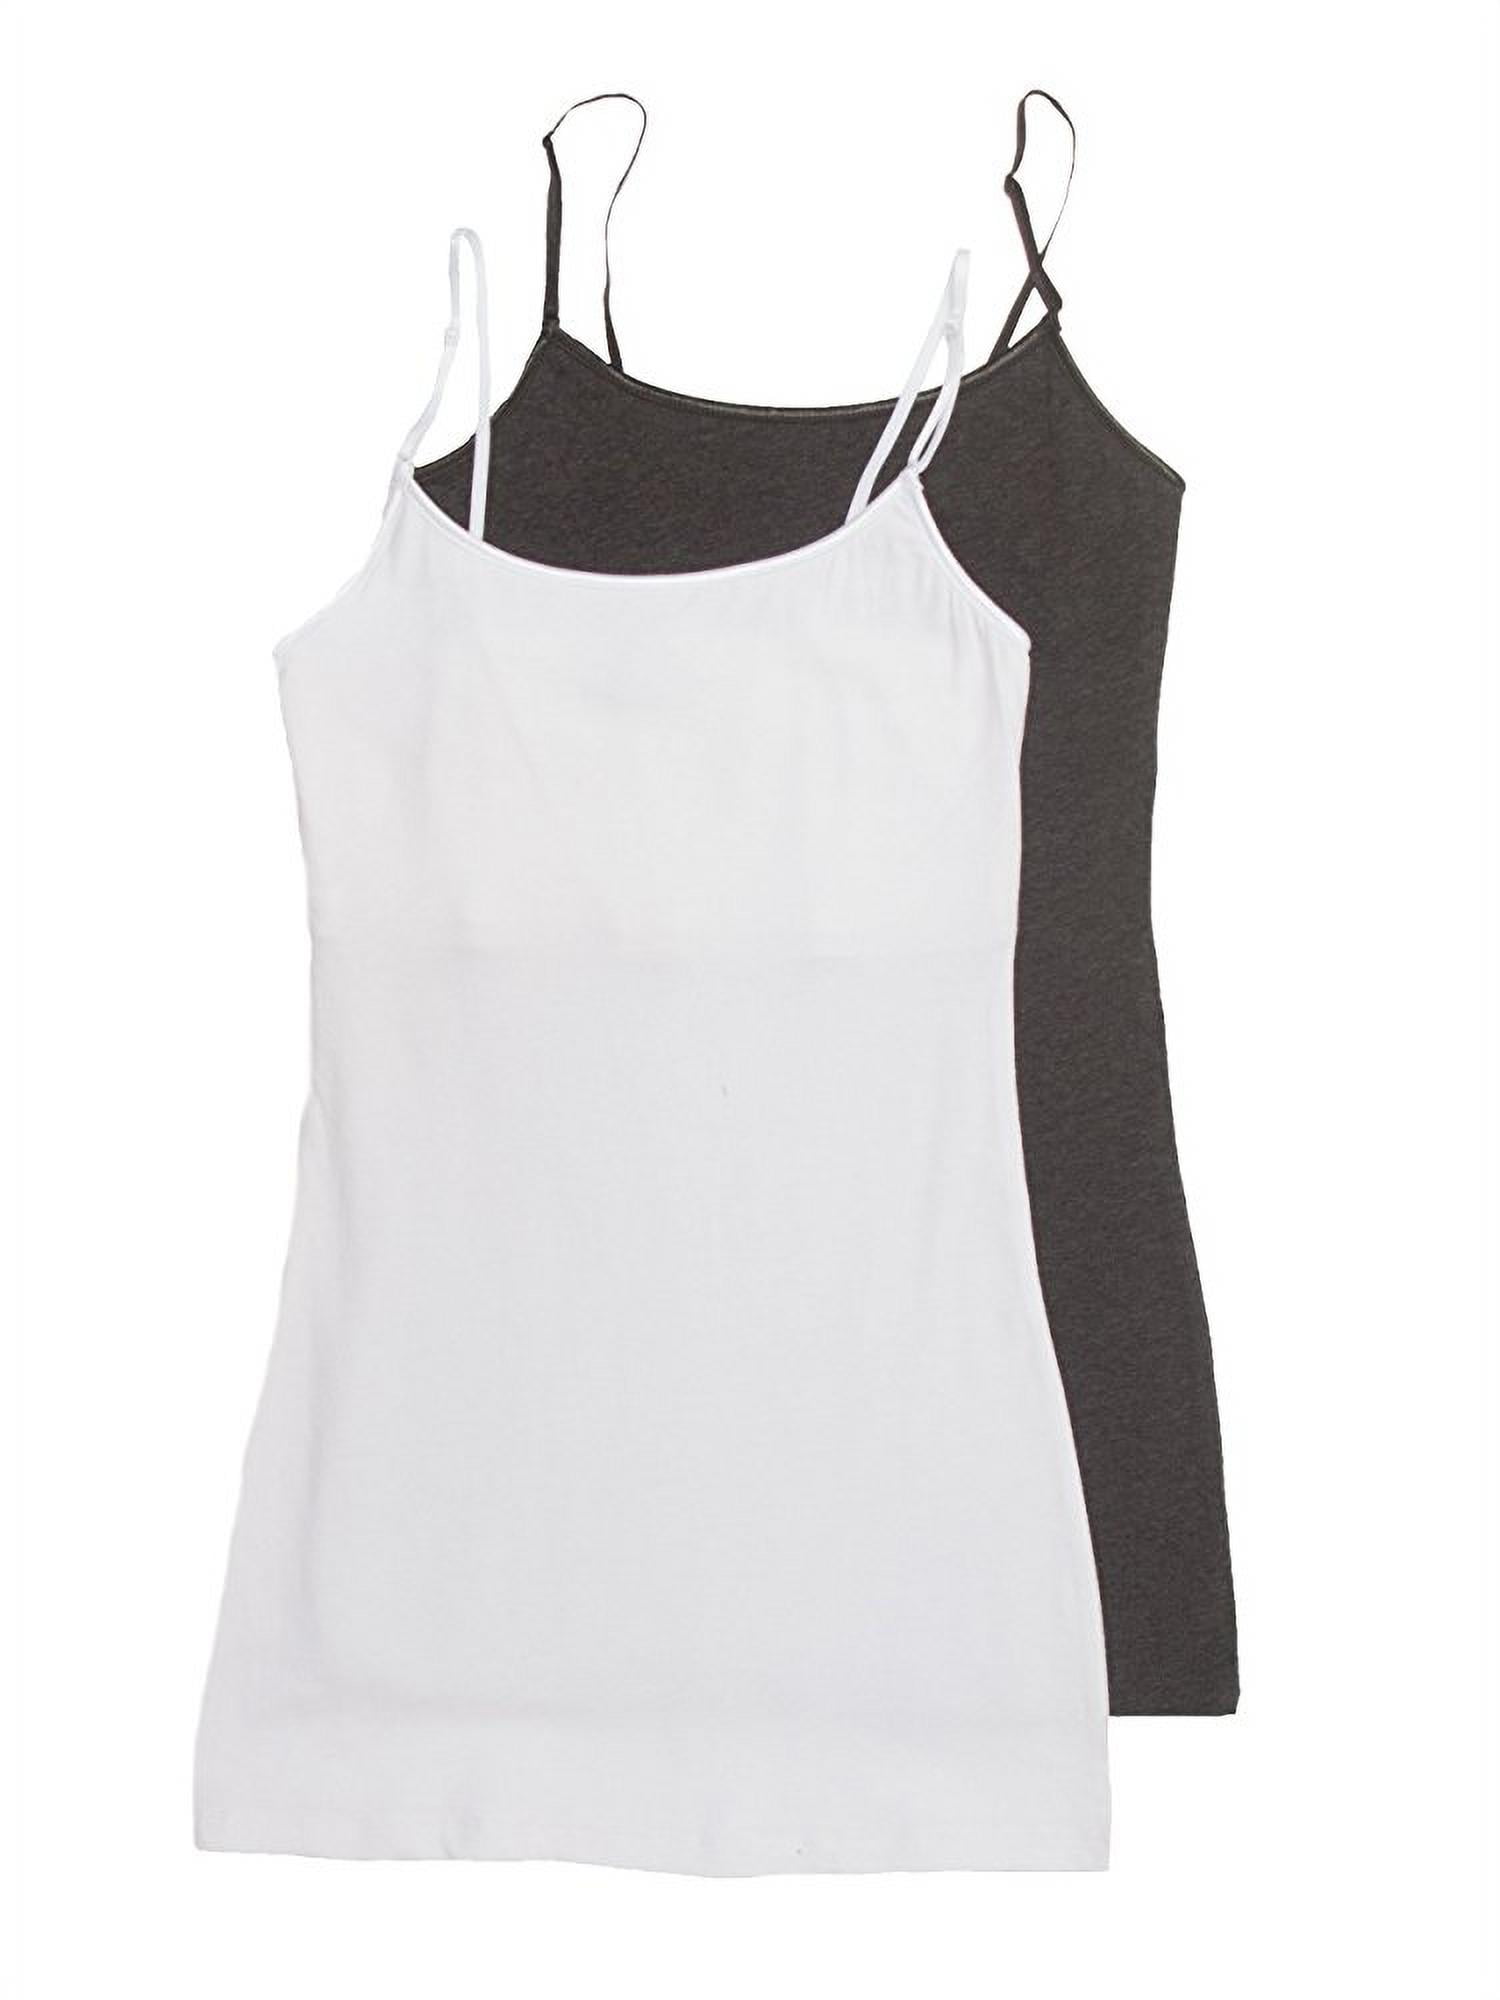 Cami Camisole Built in Shelf BRA Adjustable Spaghetti Strap Tank Top,Medium, White : : Clothing, Shoes & Accessories